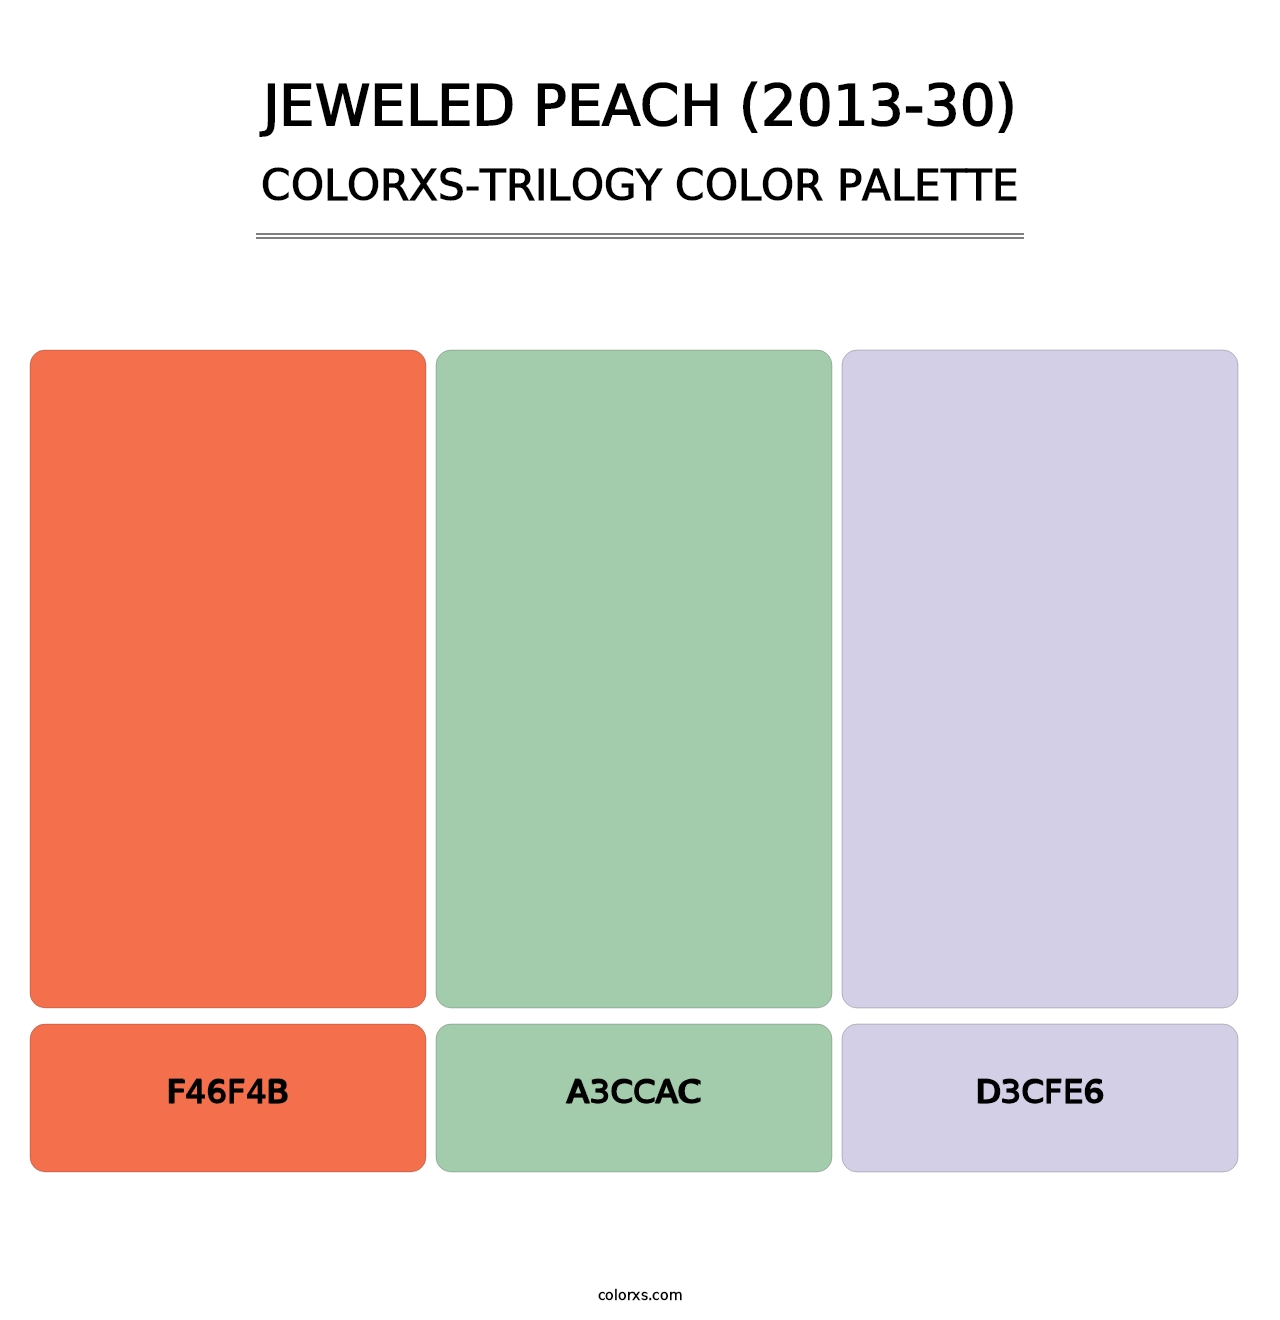 Jeweled Peach (2013-30) - Colorxs Trilogy Palette